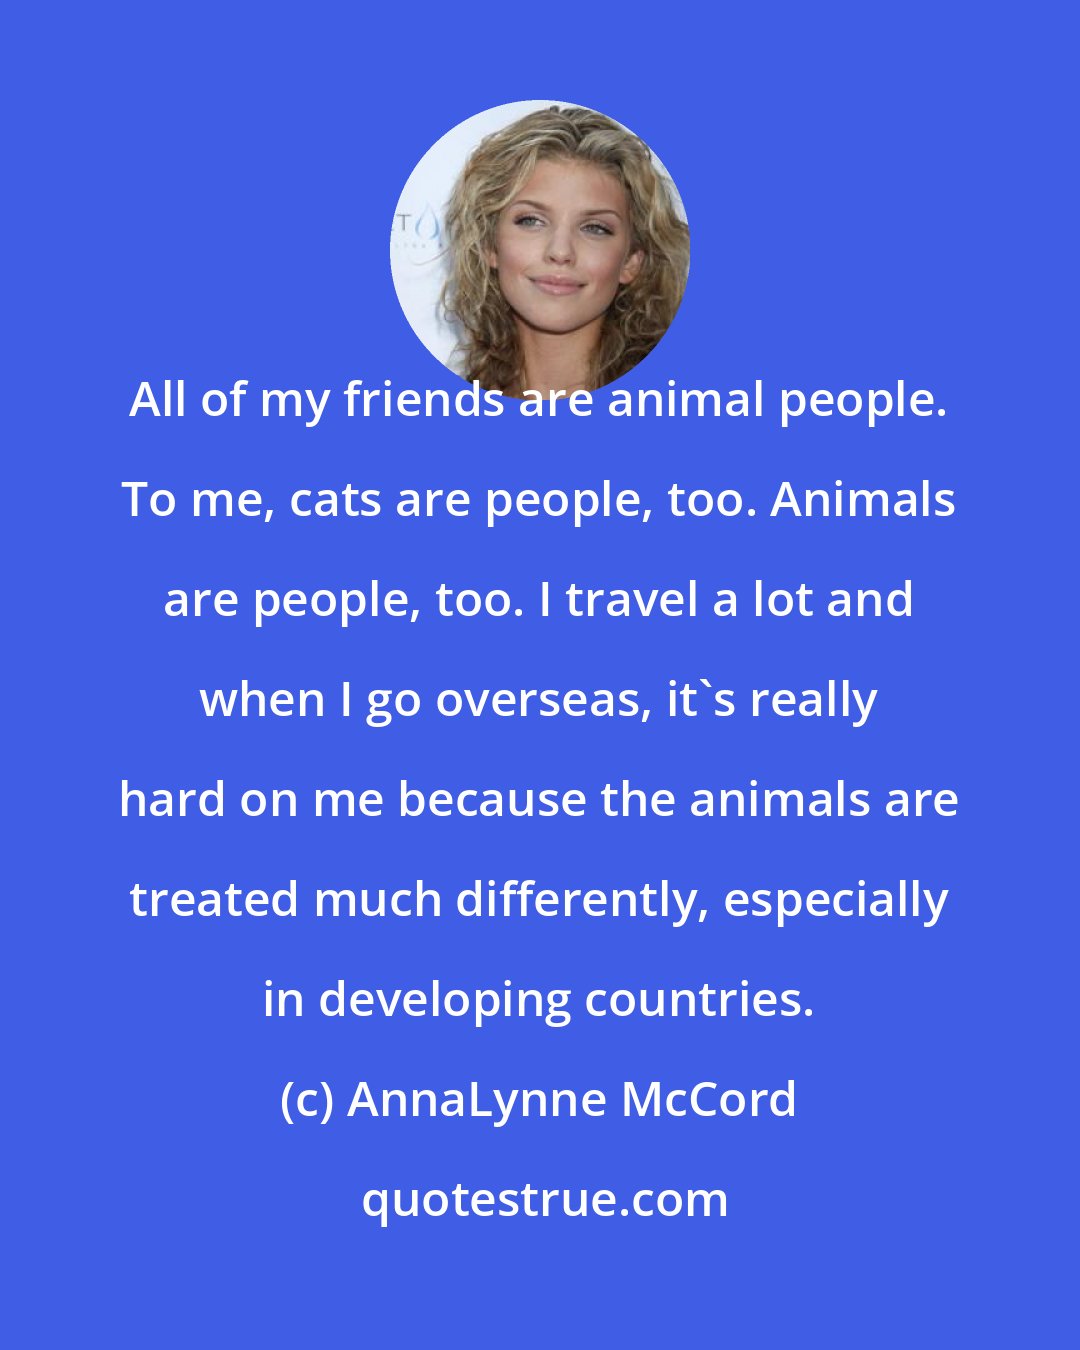 AnnaLynne McCord: All of my friends are animal people. To me, cats are people, too. Animals are people, too. I travel a lot and when I go overseas, it's really hard on me because the animals are treated much differently, especially in developing countries.